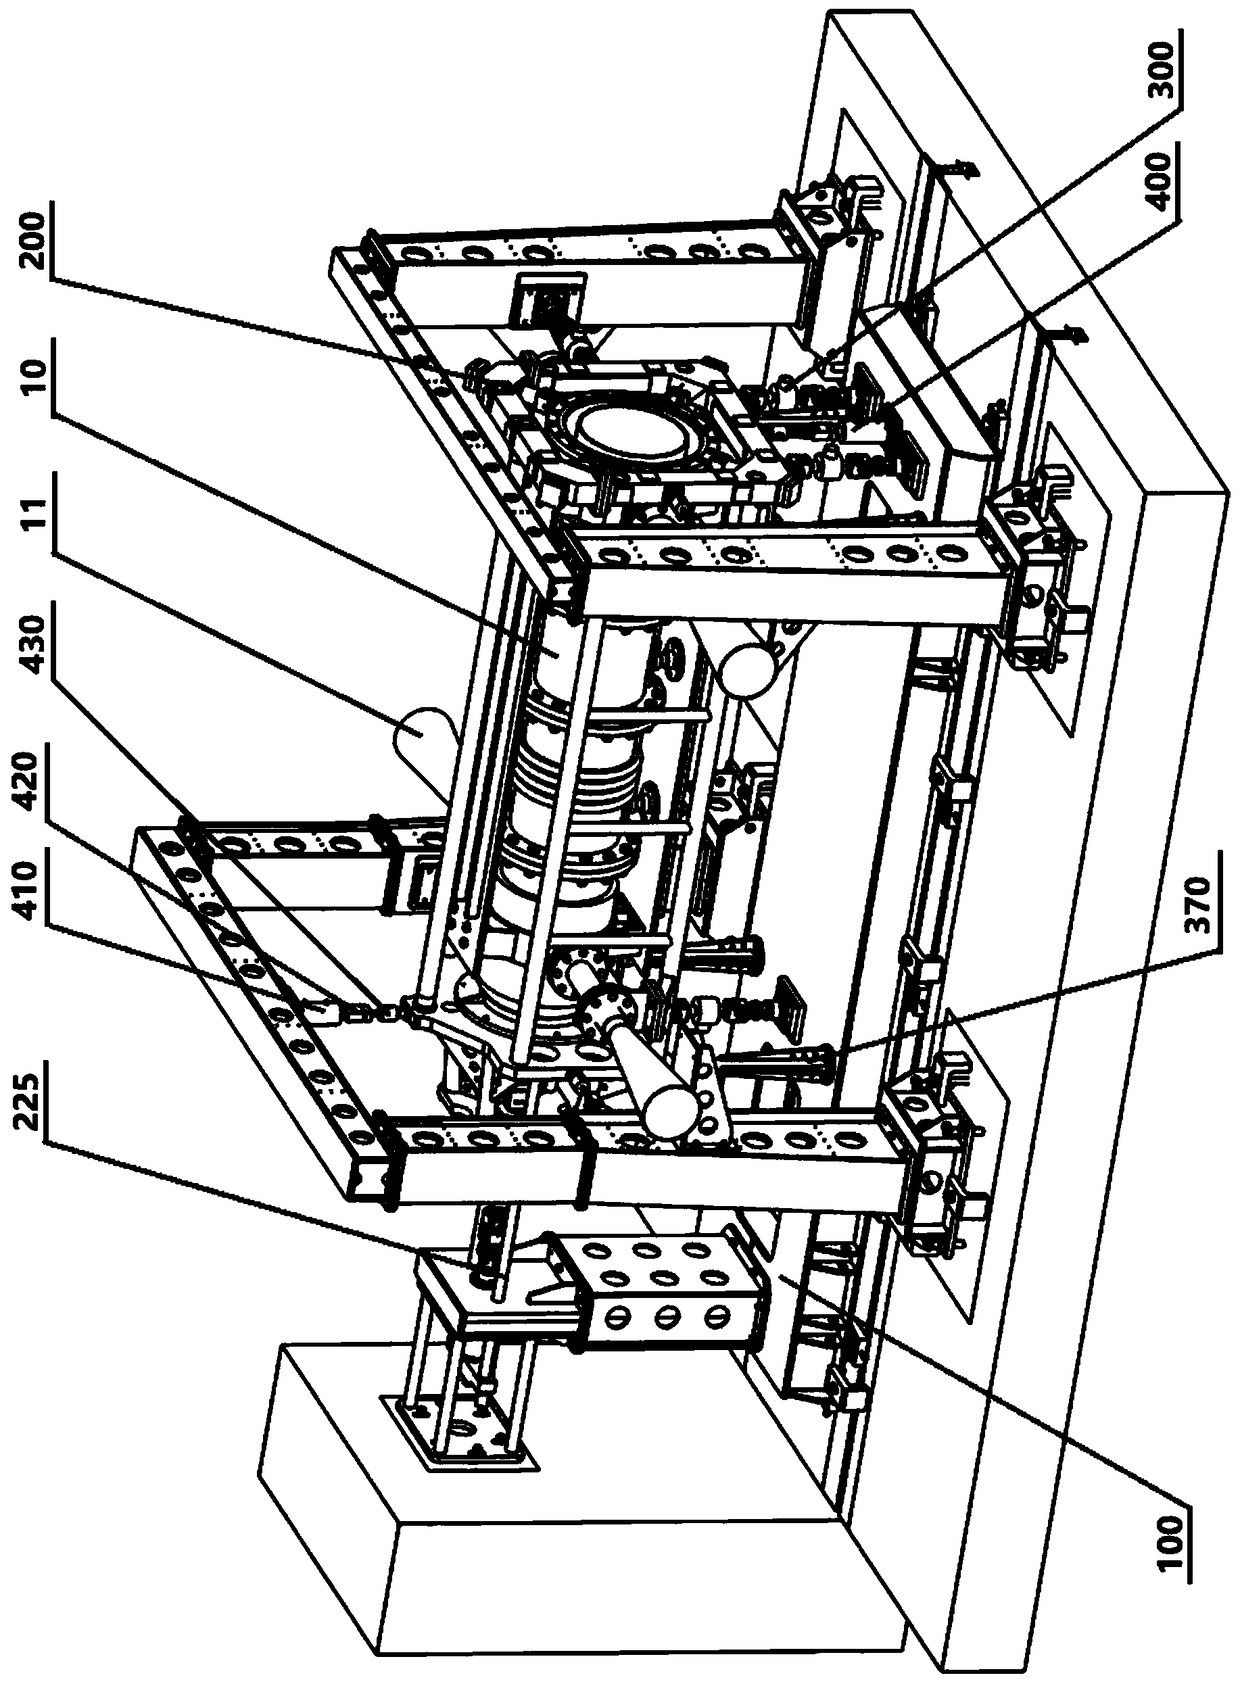 Six-component test stand and method for measuring vector thrust